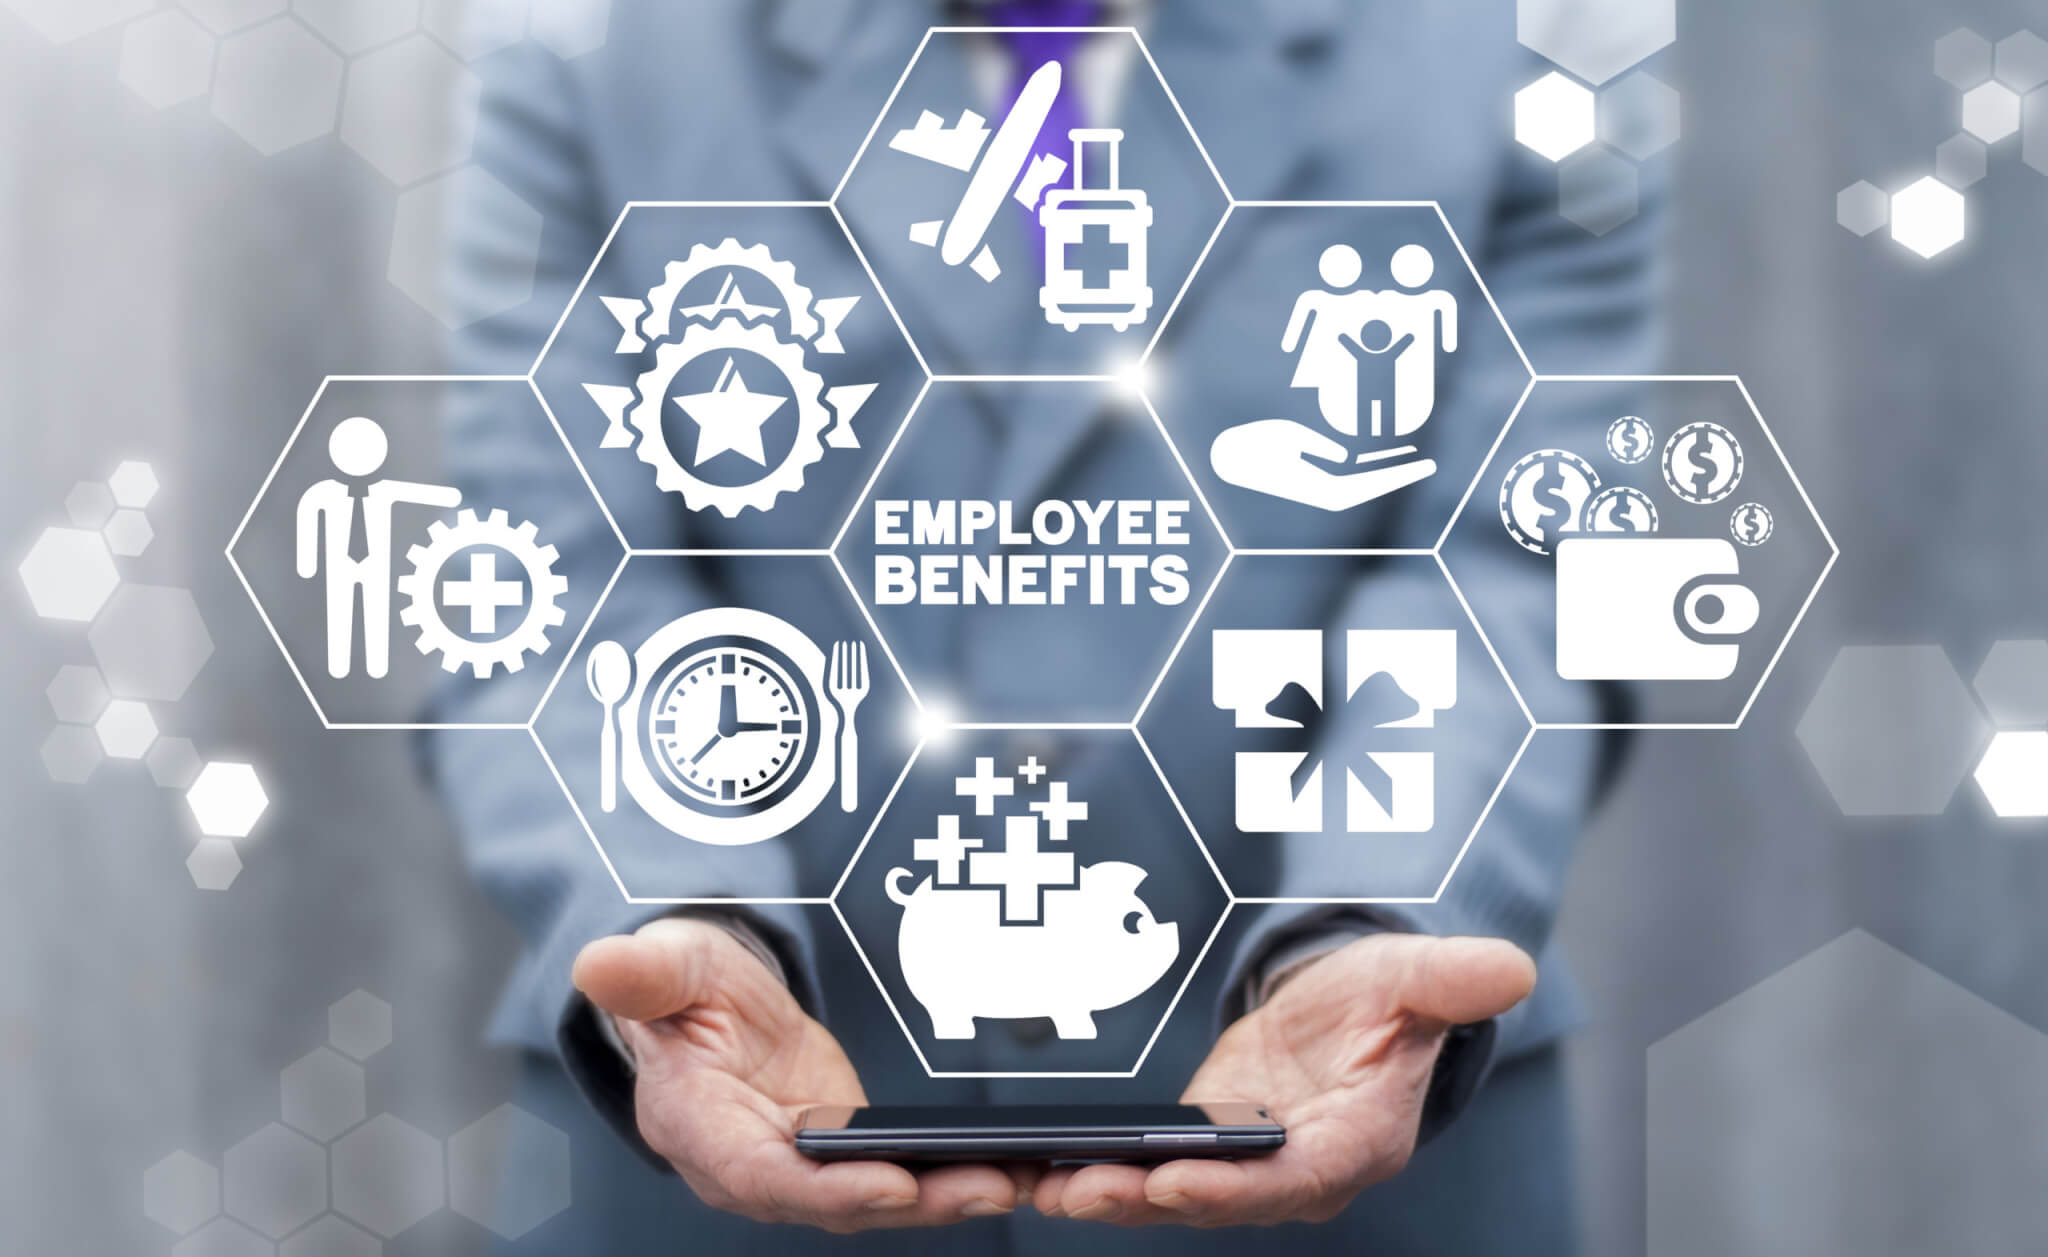 The Problem at Hand with Employee Benefits